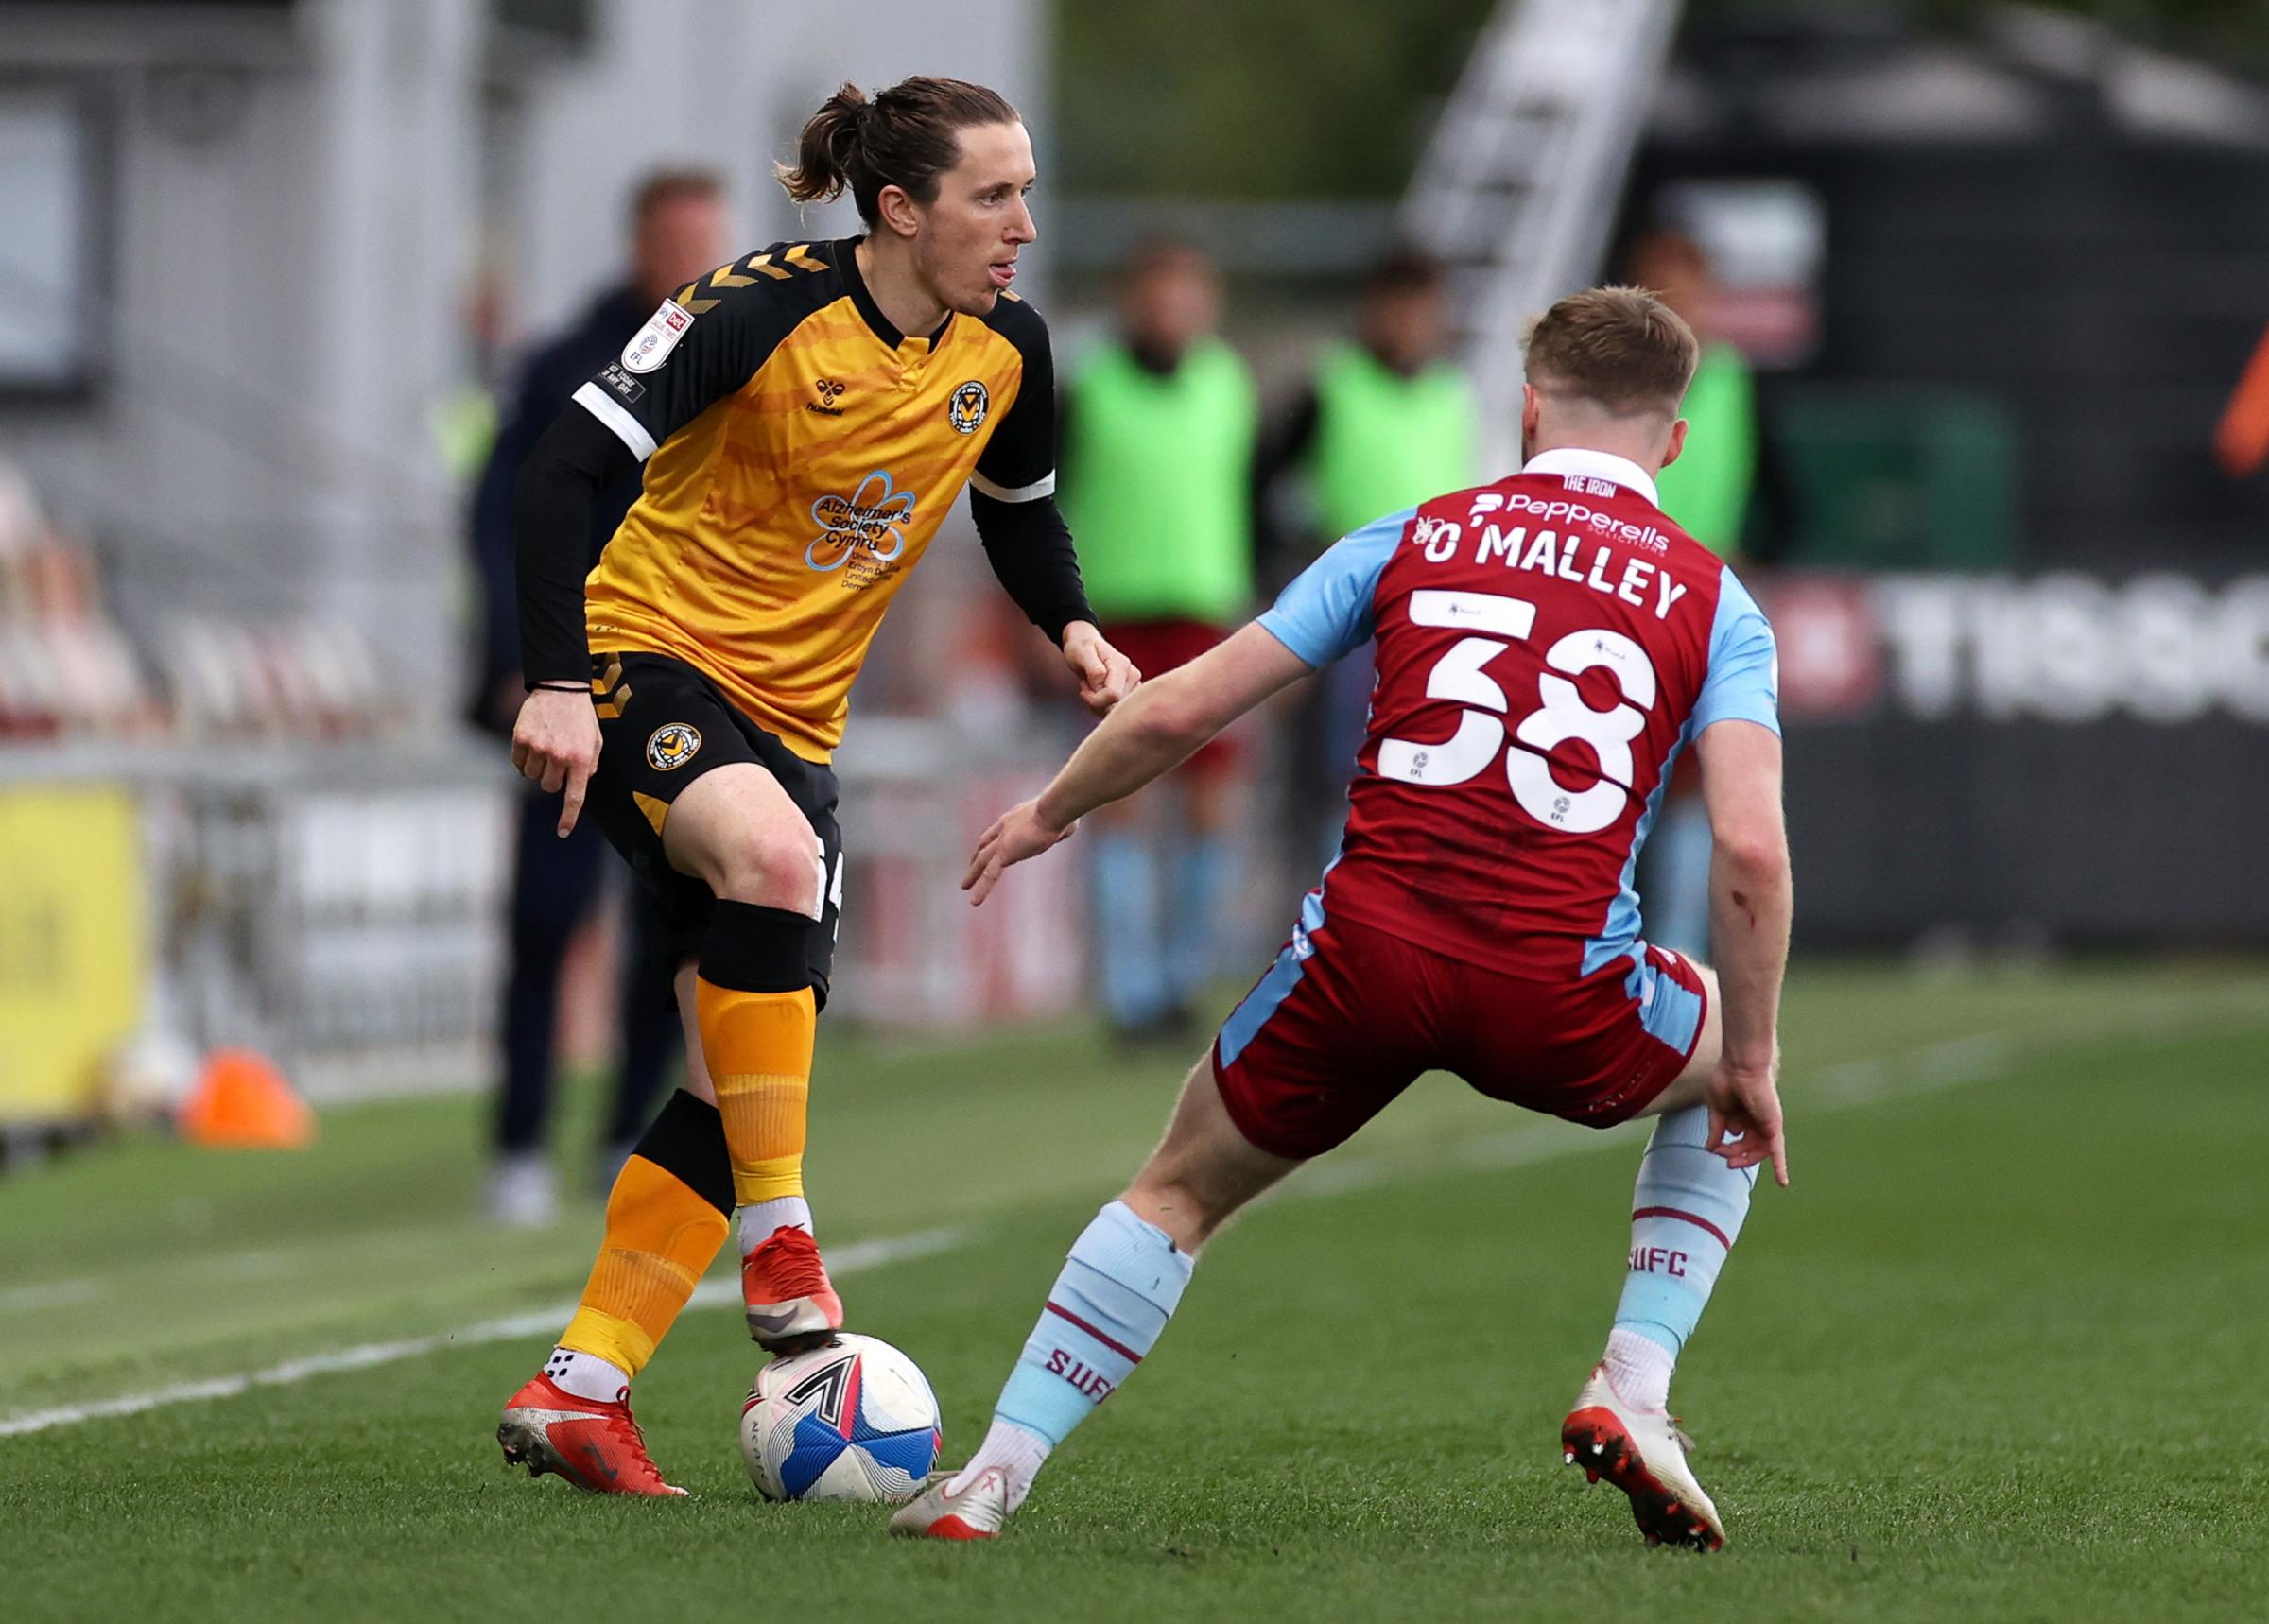 27.04.21 - Newport County v Scunthorpe United - SkyBet League Two - Aaron Lewis of Newport County is challenged by Mason OMalley of Scunthorpe.